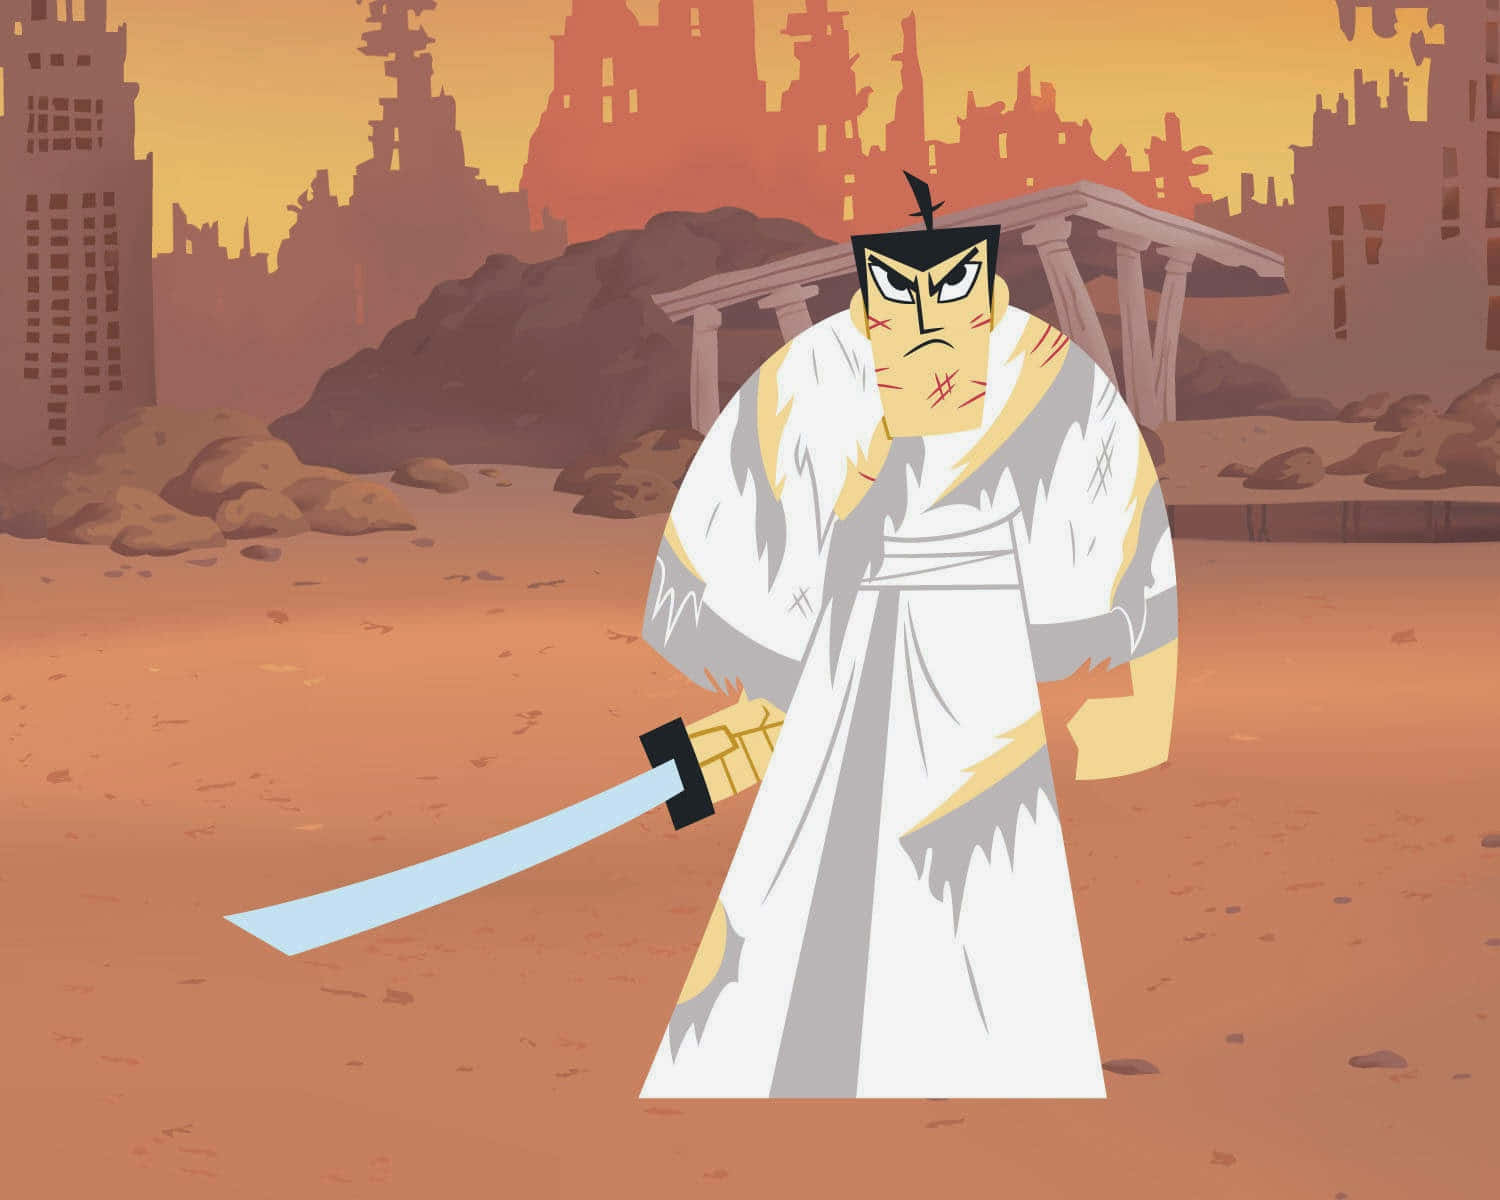 Samurai Jack - A Legacy of Strength and Courage